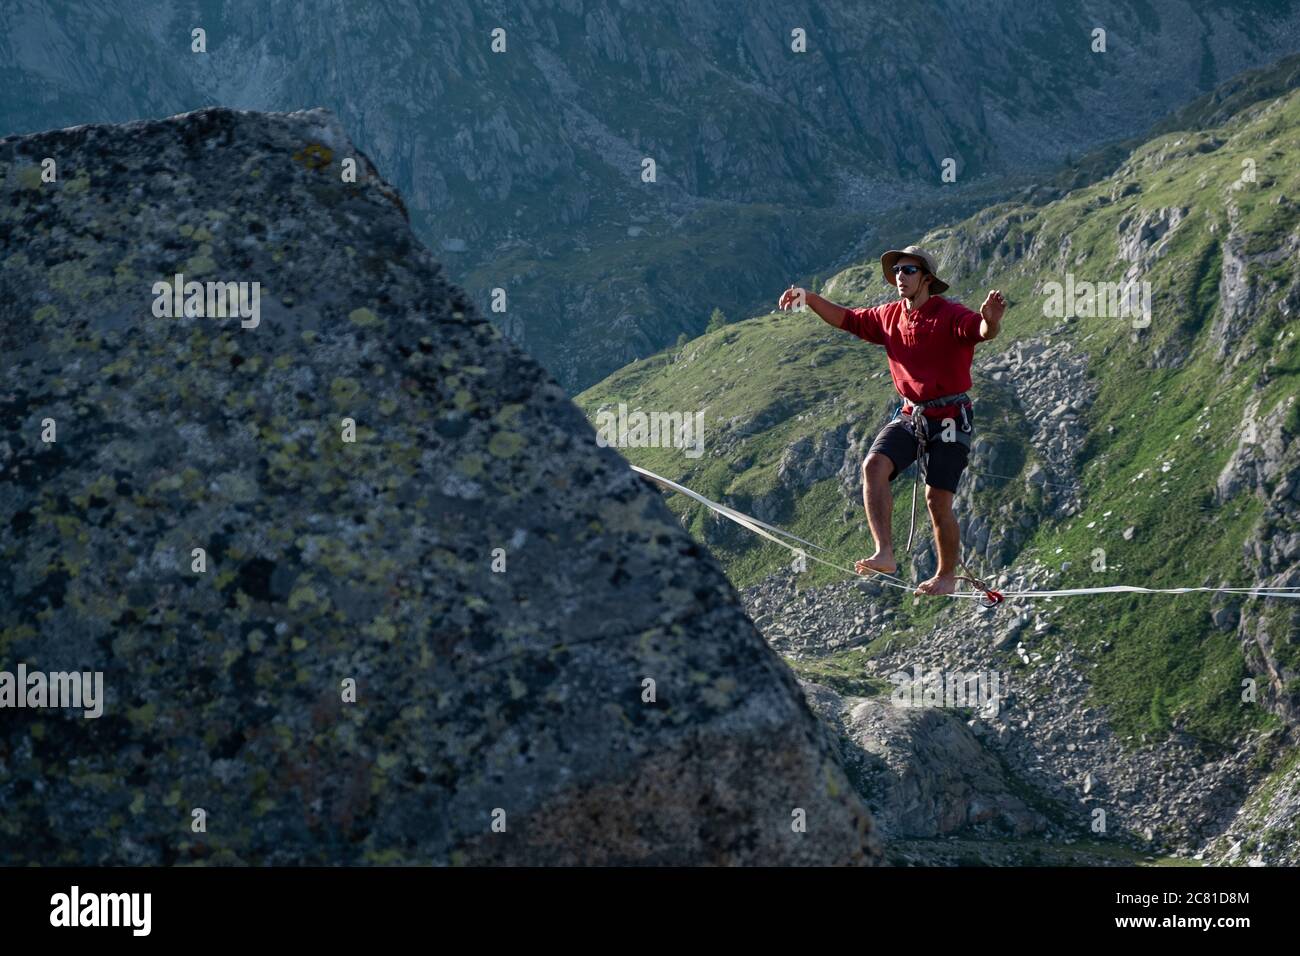 Lago Nero, Pinzolo, Italy - 2020 july 18th: young boy with red hoodie and hat practising slackline on a rope hanging between two peaks, great height a Stock Photo